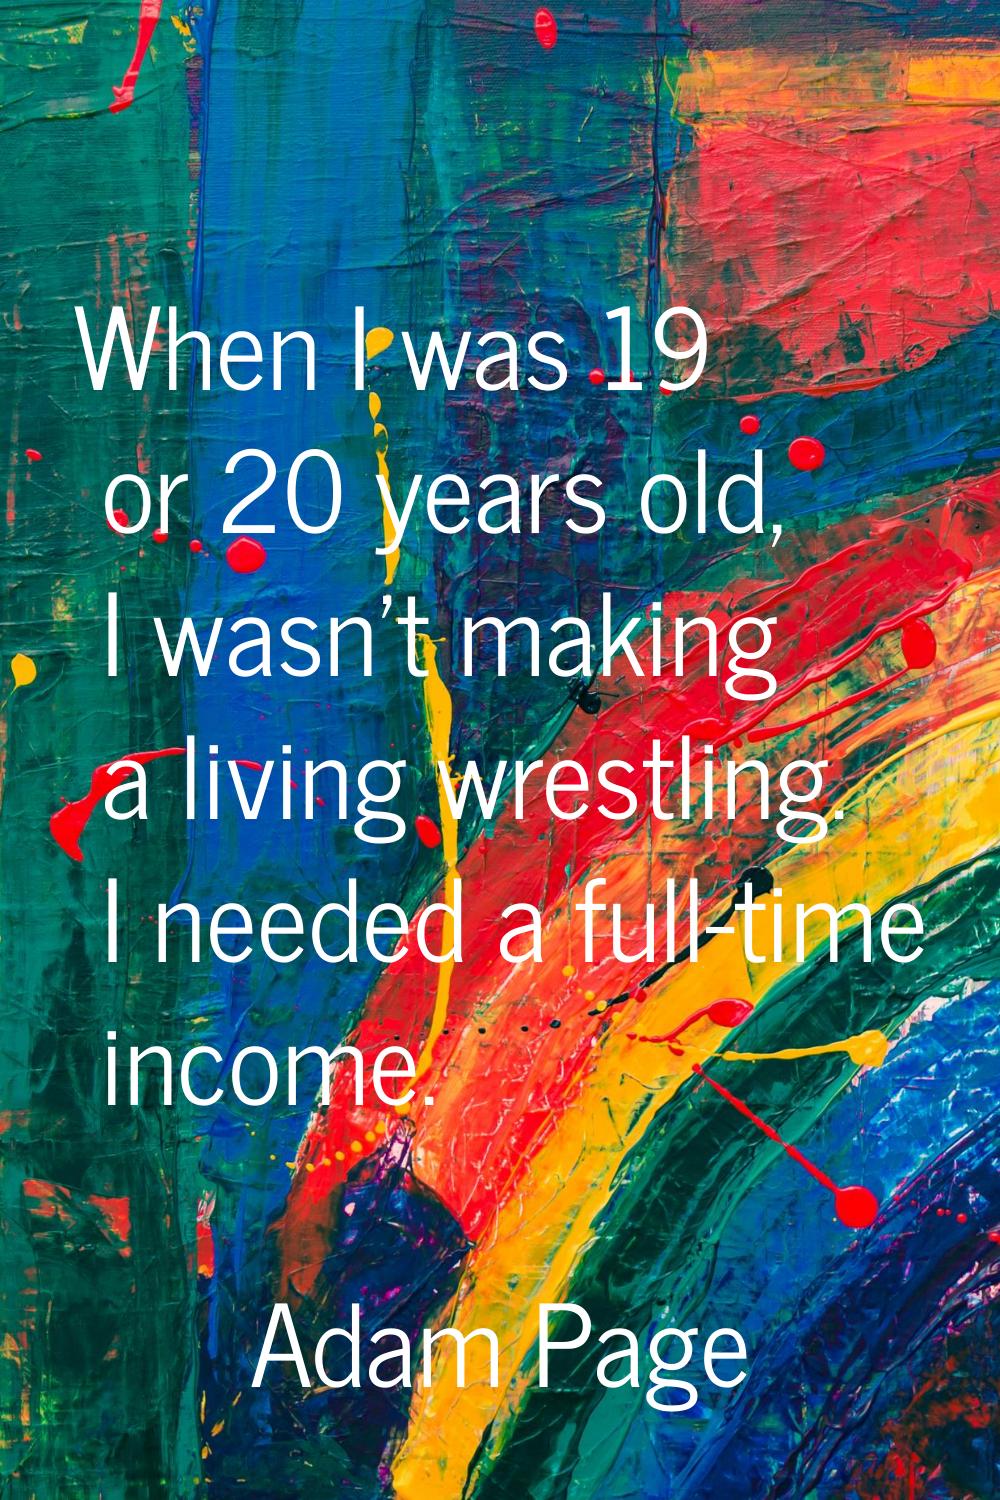 When I was 19 or 20 years old, I wasn't making a living wrestling. I needed a full-time income.